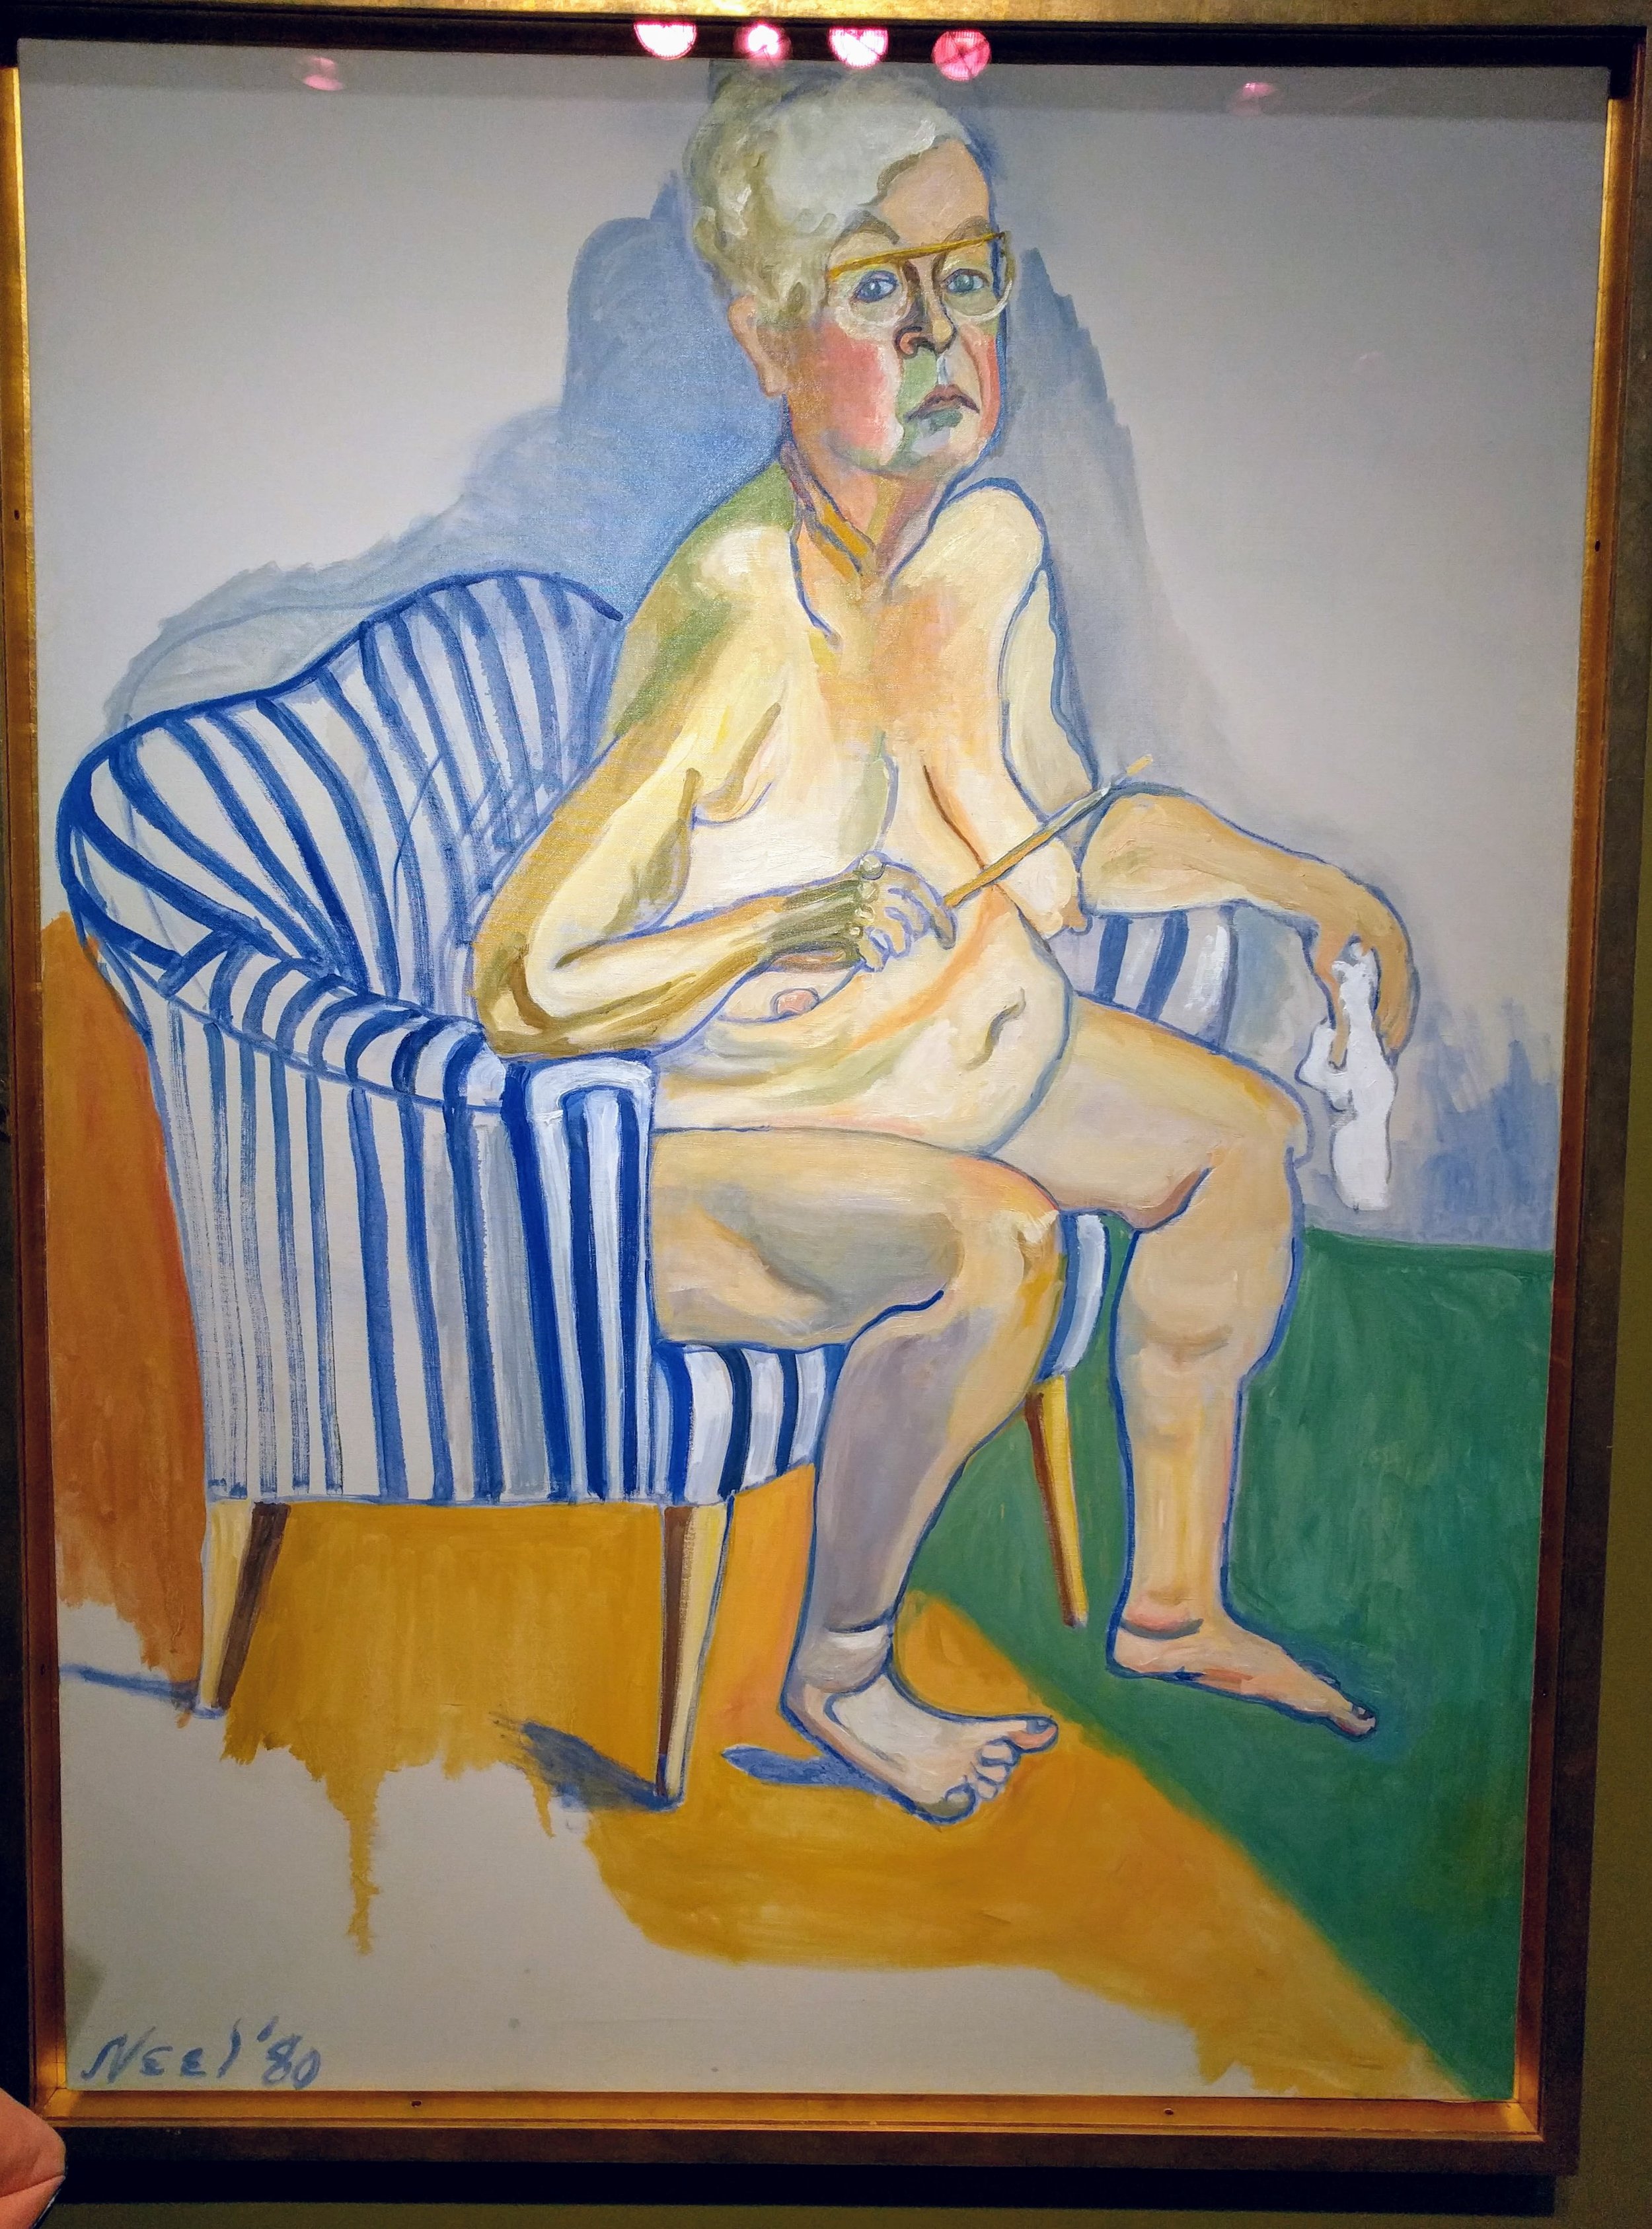  Self portrait by Alice Neel: one of my favorites in the American Art Museum. She said, “the reason my cheeks got so pink was that it was so hard for me to paint that I almost killed myself painting it." 